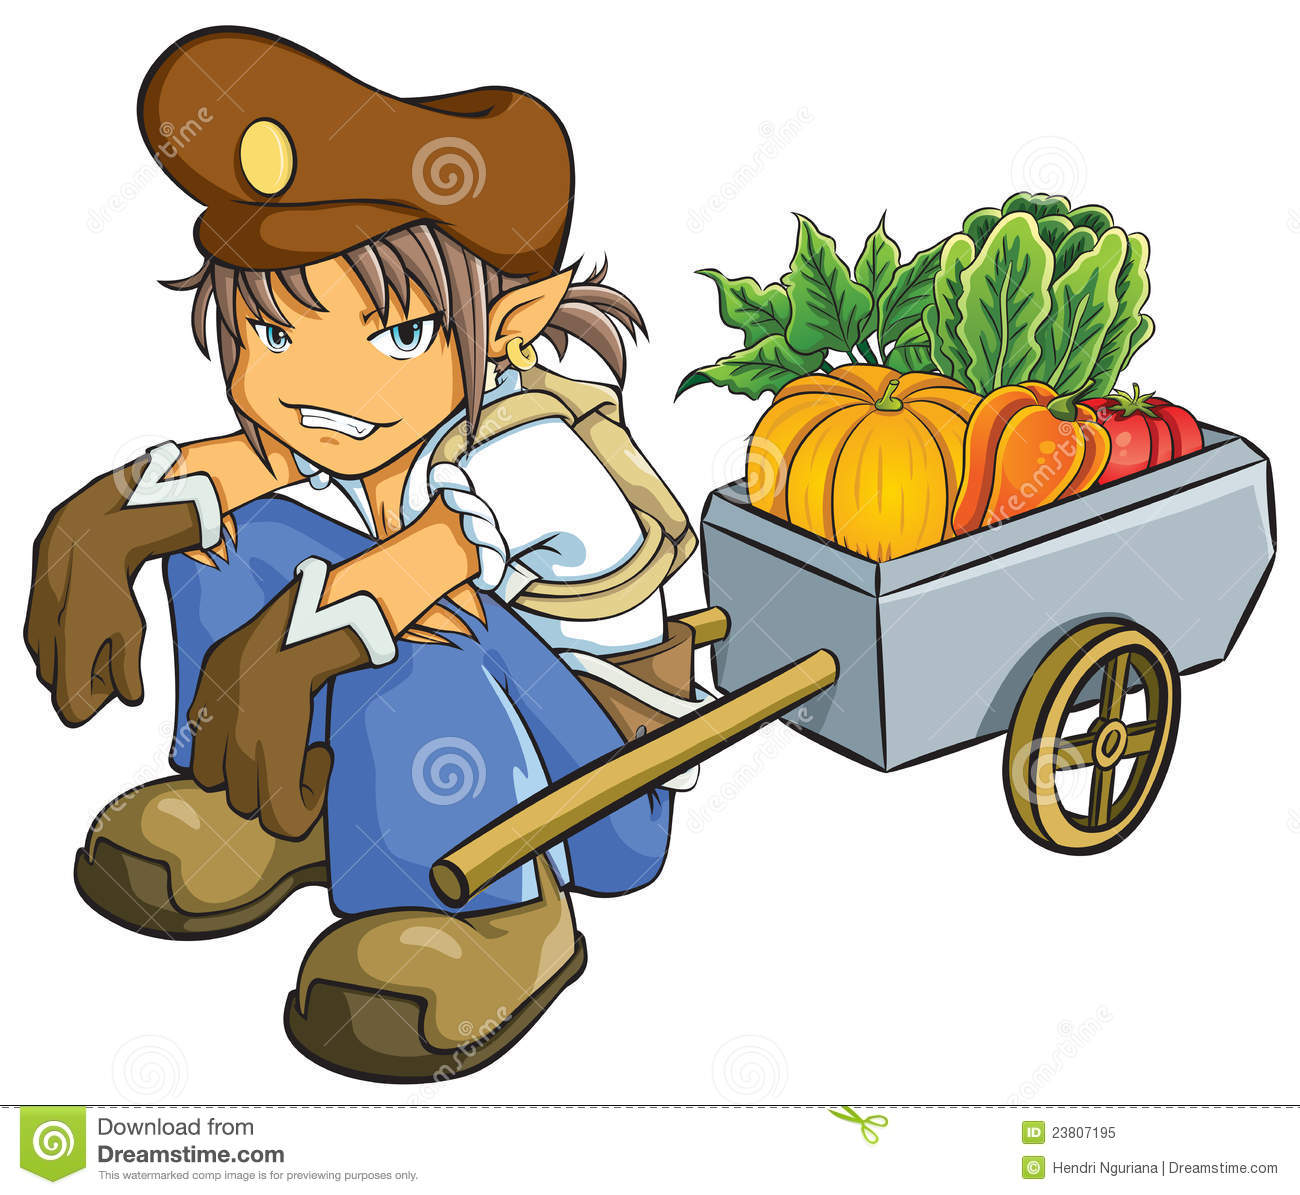 Merchant Selling Vegetables Royalty Free Stock Photo   Image  23807195